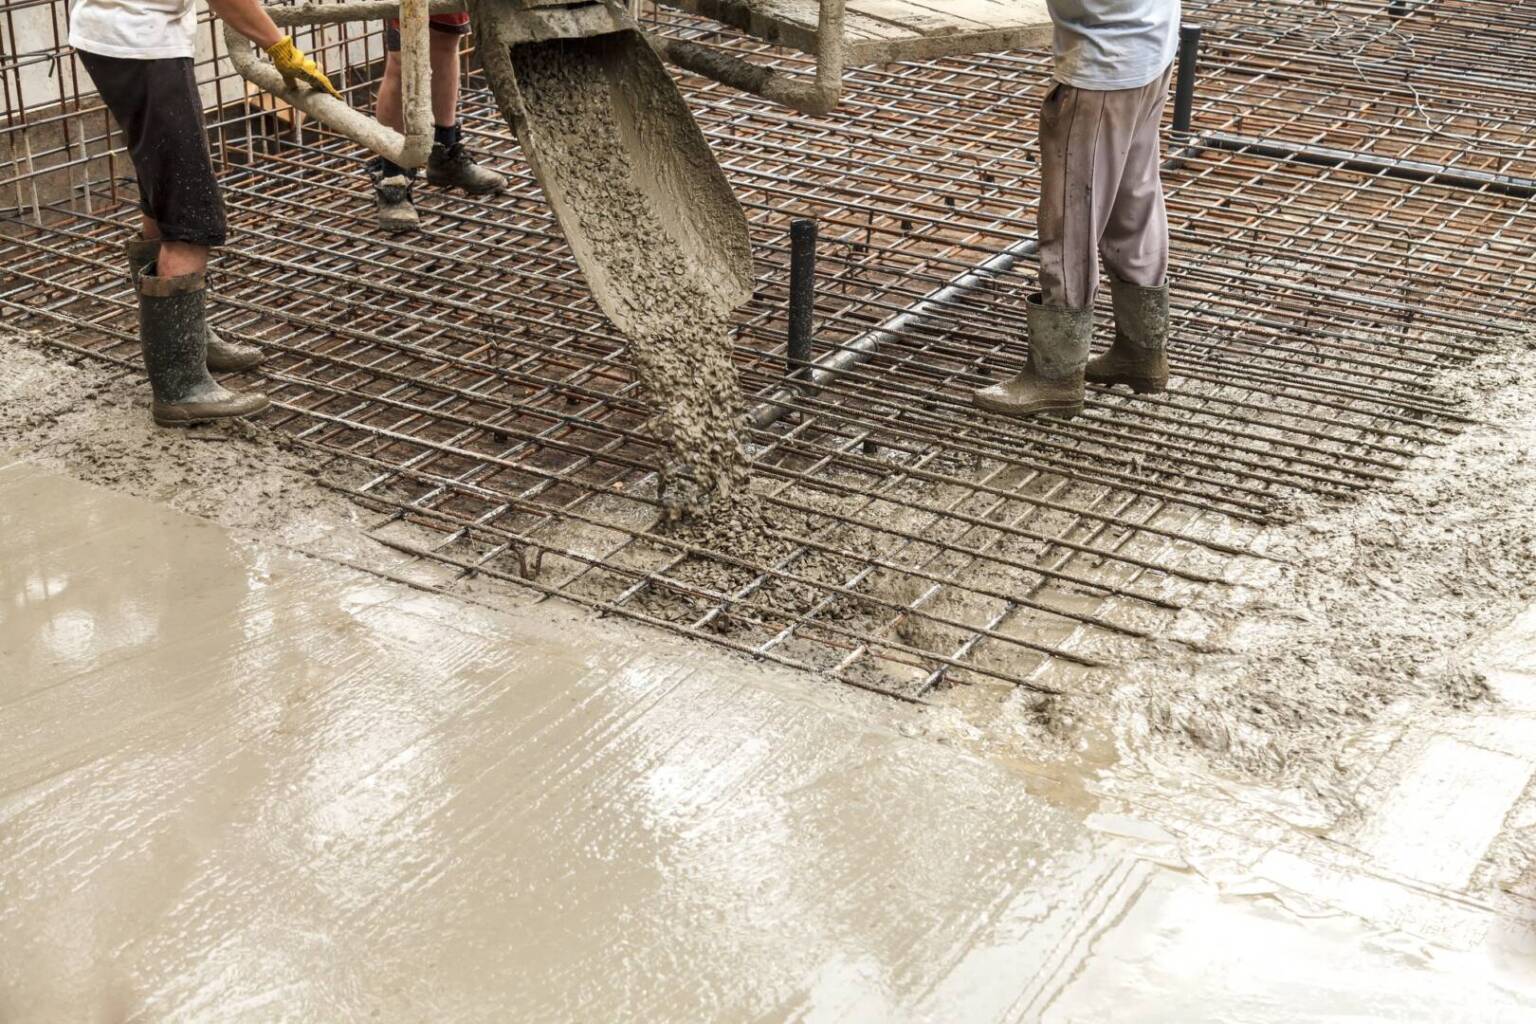 Pouring concrete into the construction of the house. Builders are pouring ready-mixed concrete